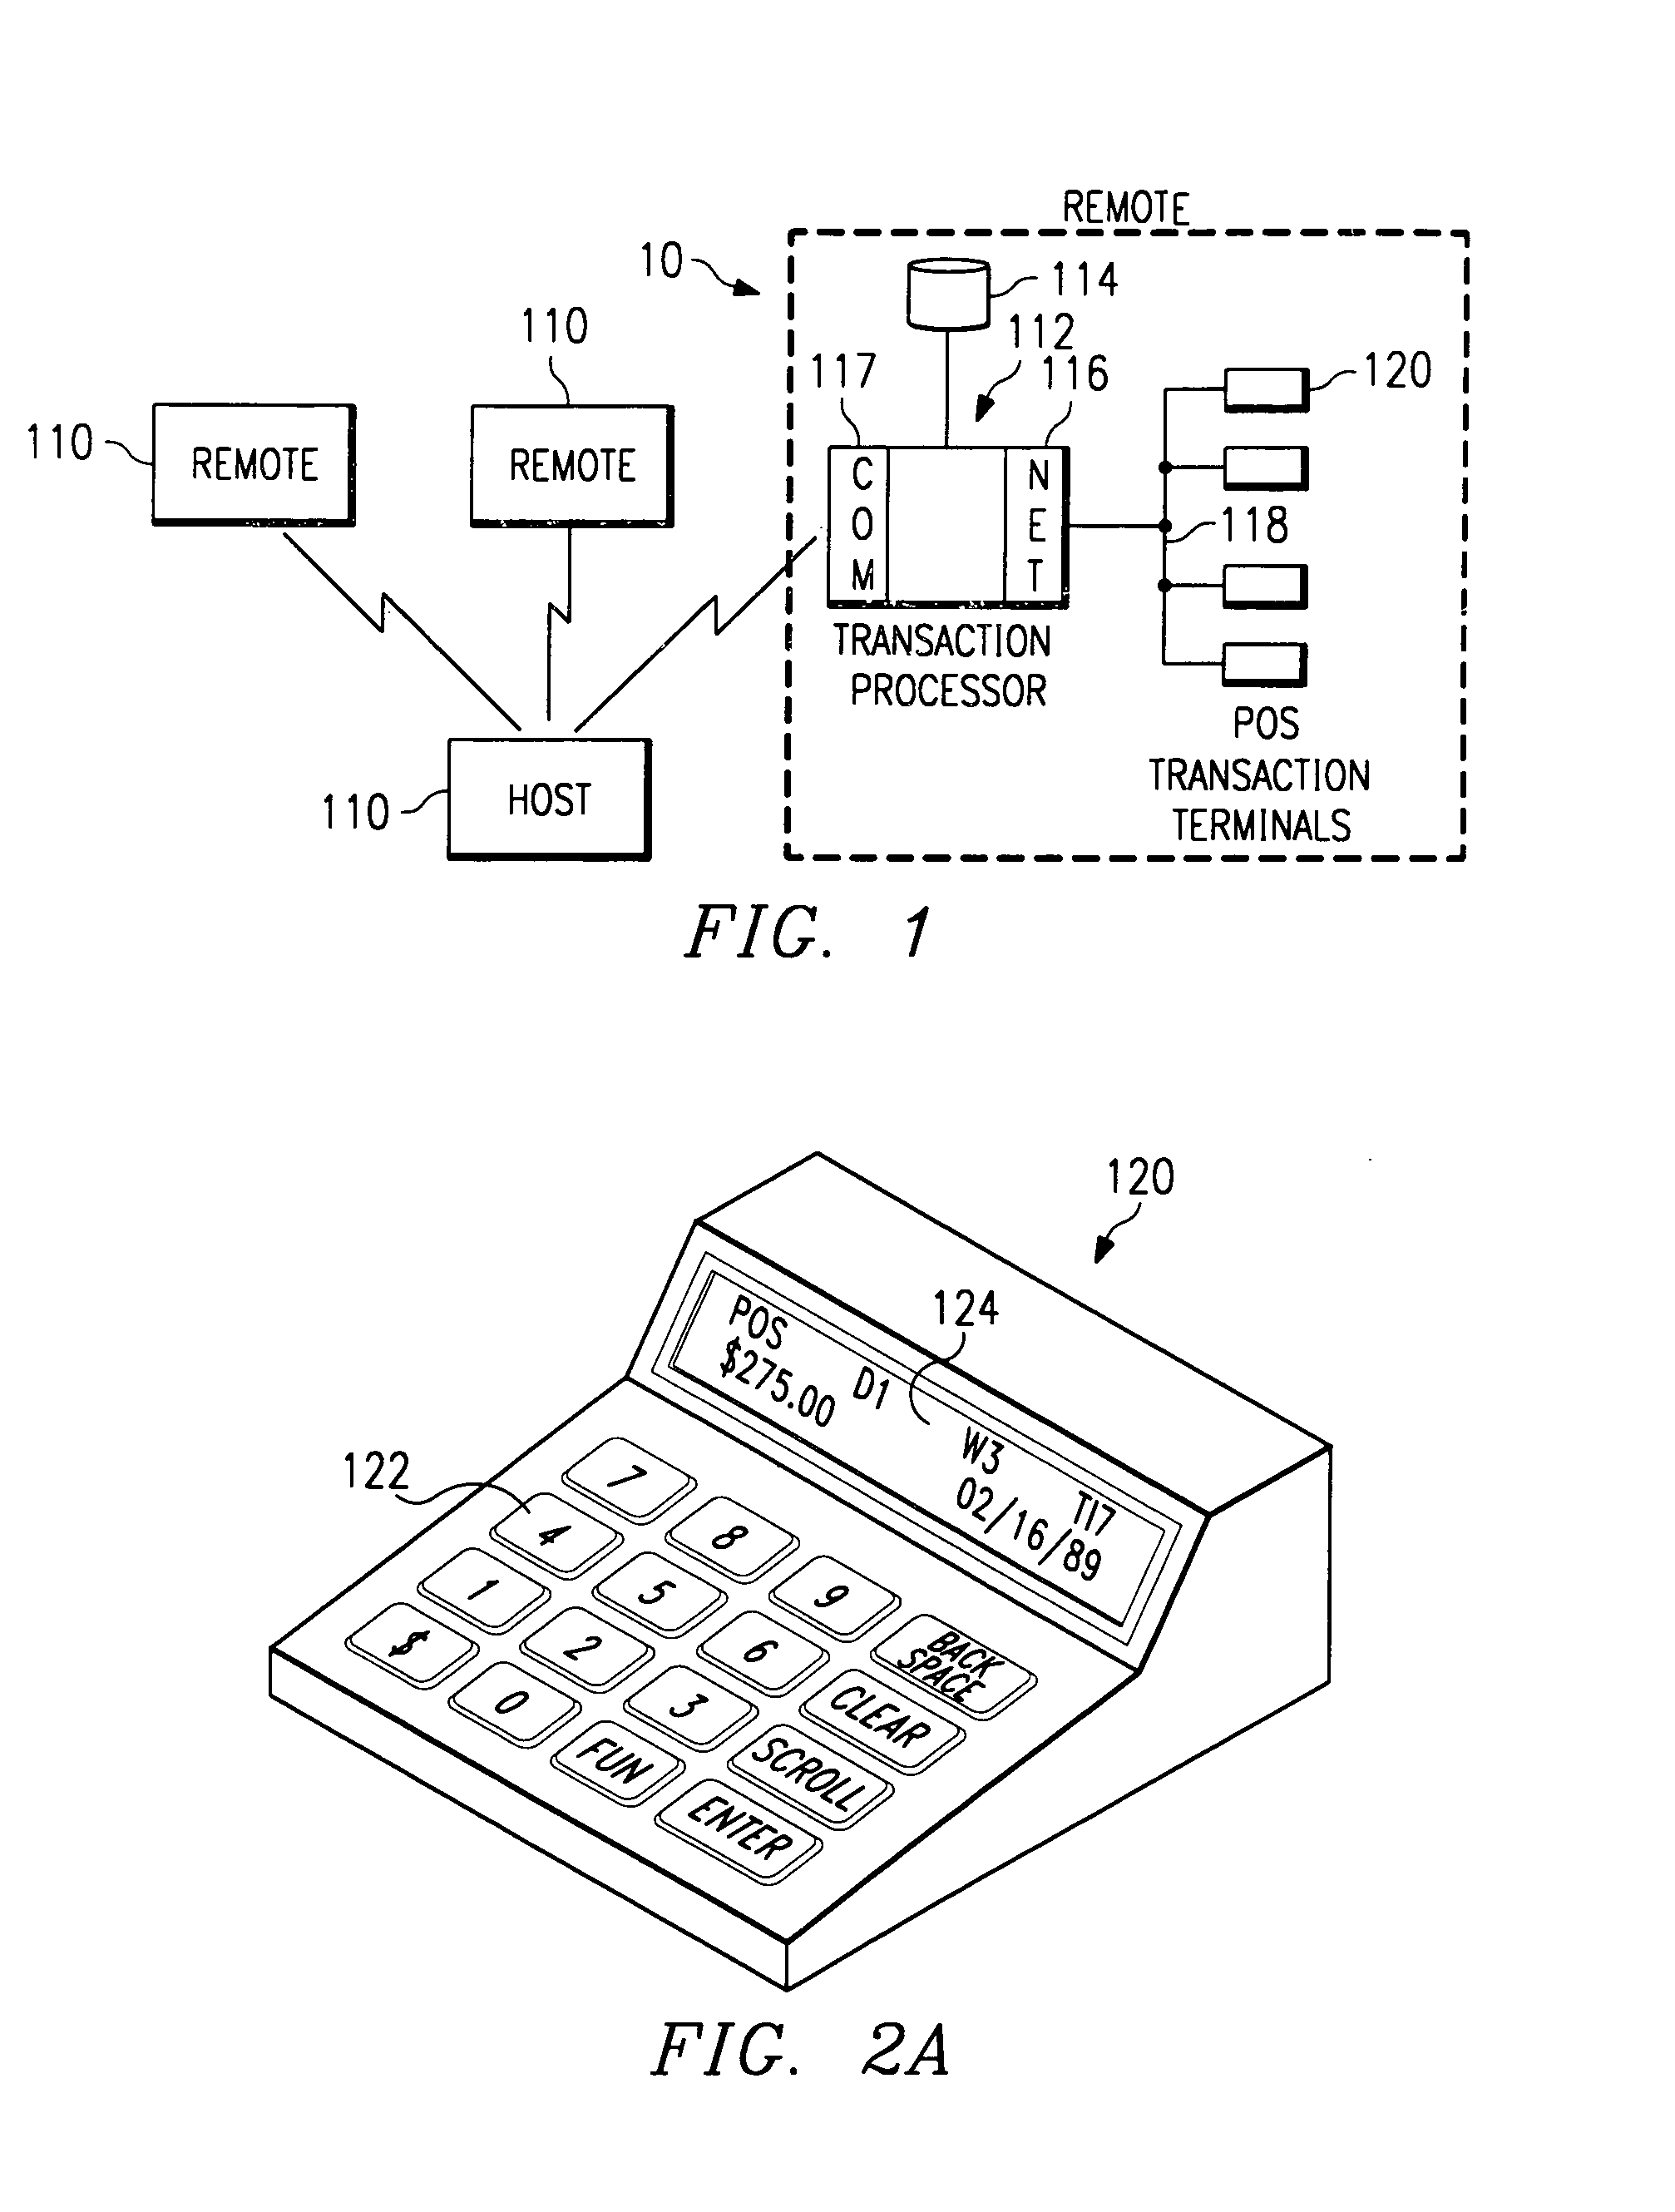 System, method, and database for processing transactions